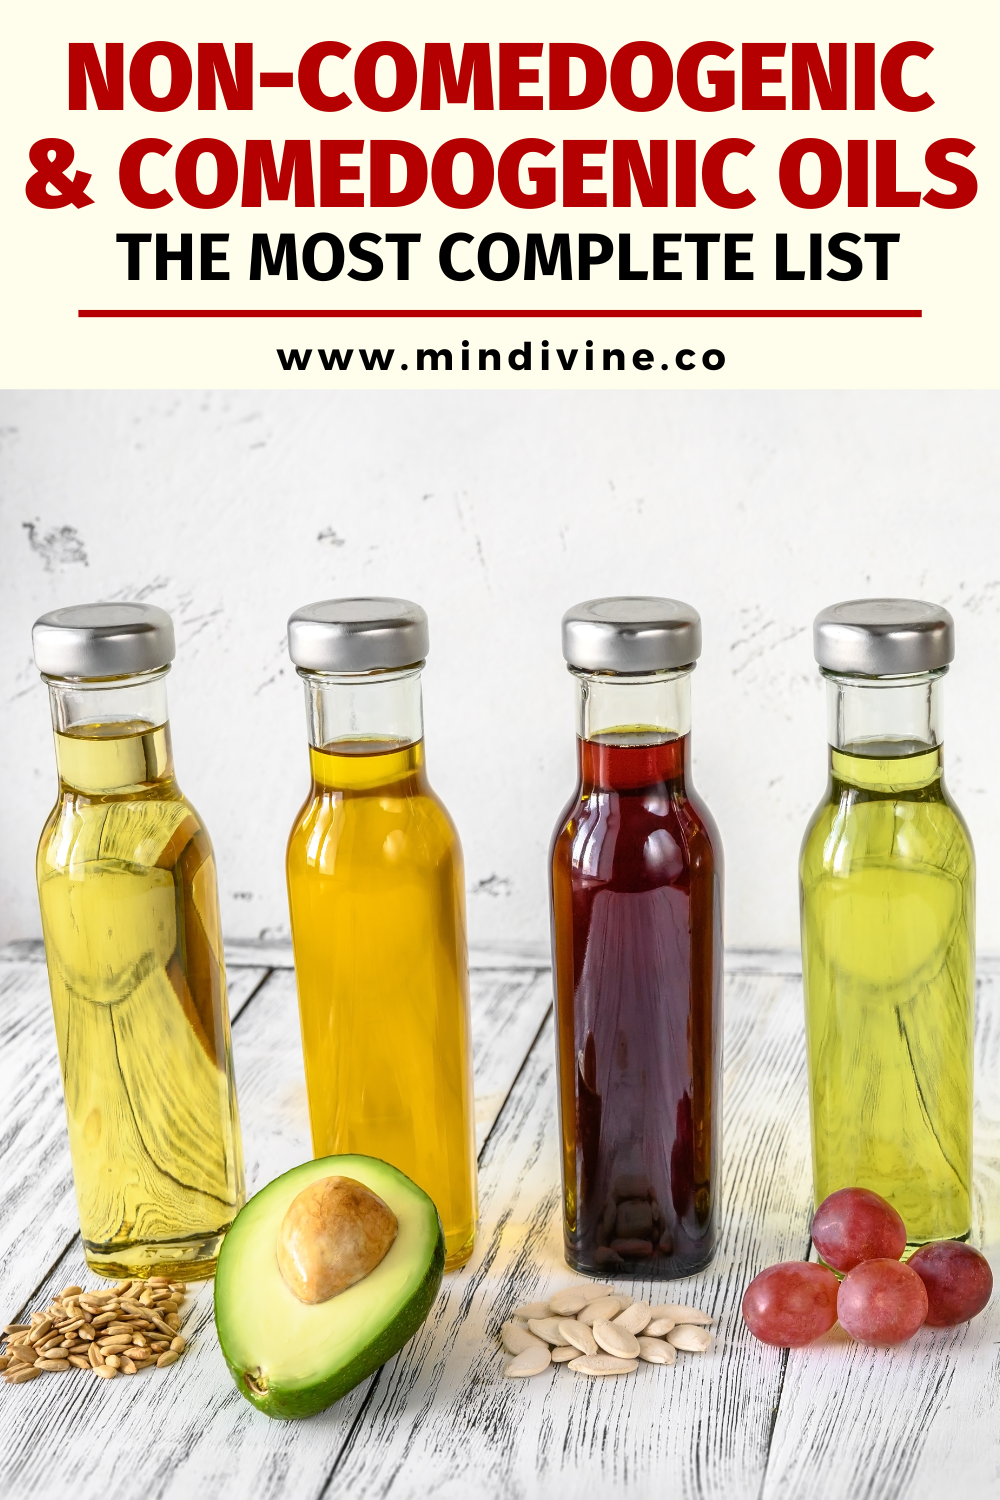 The best list of comedogenics and non-comedogenic oils.